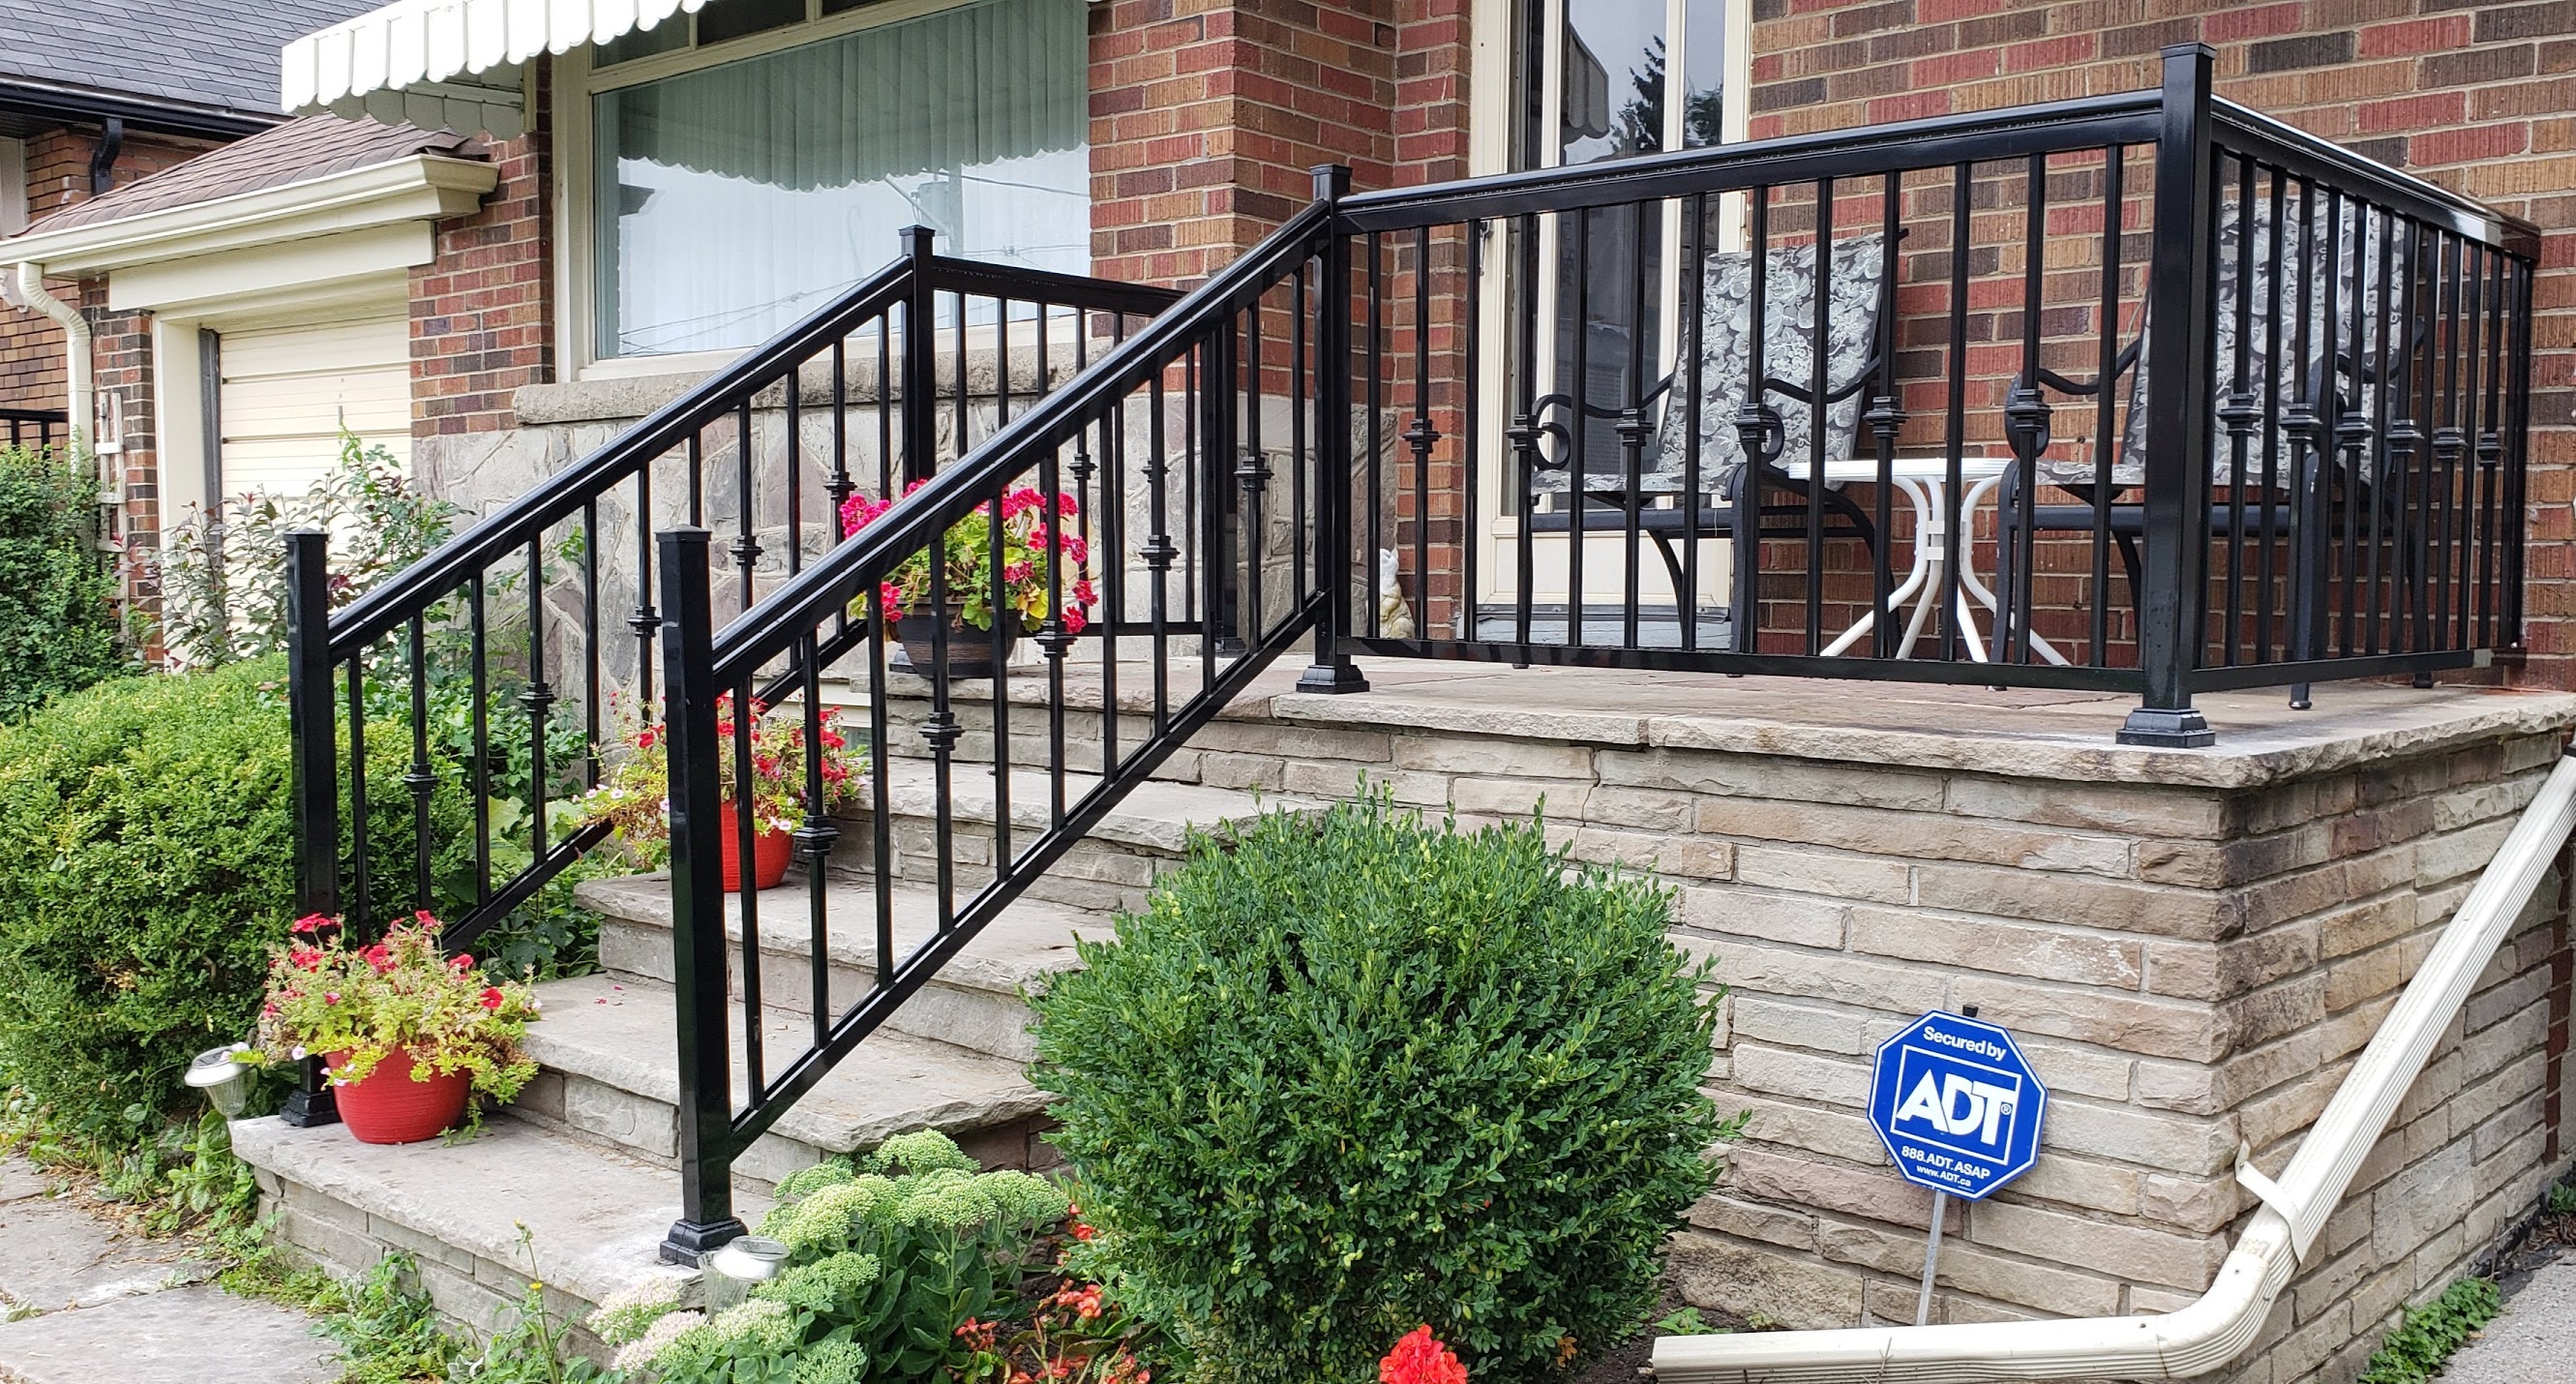 Painting Outdoor Aluminum Railing Site, How To Paint Outdoor Stair Railing